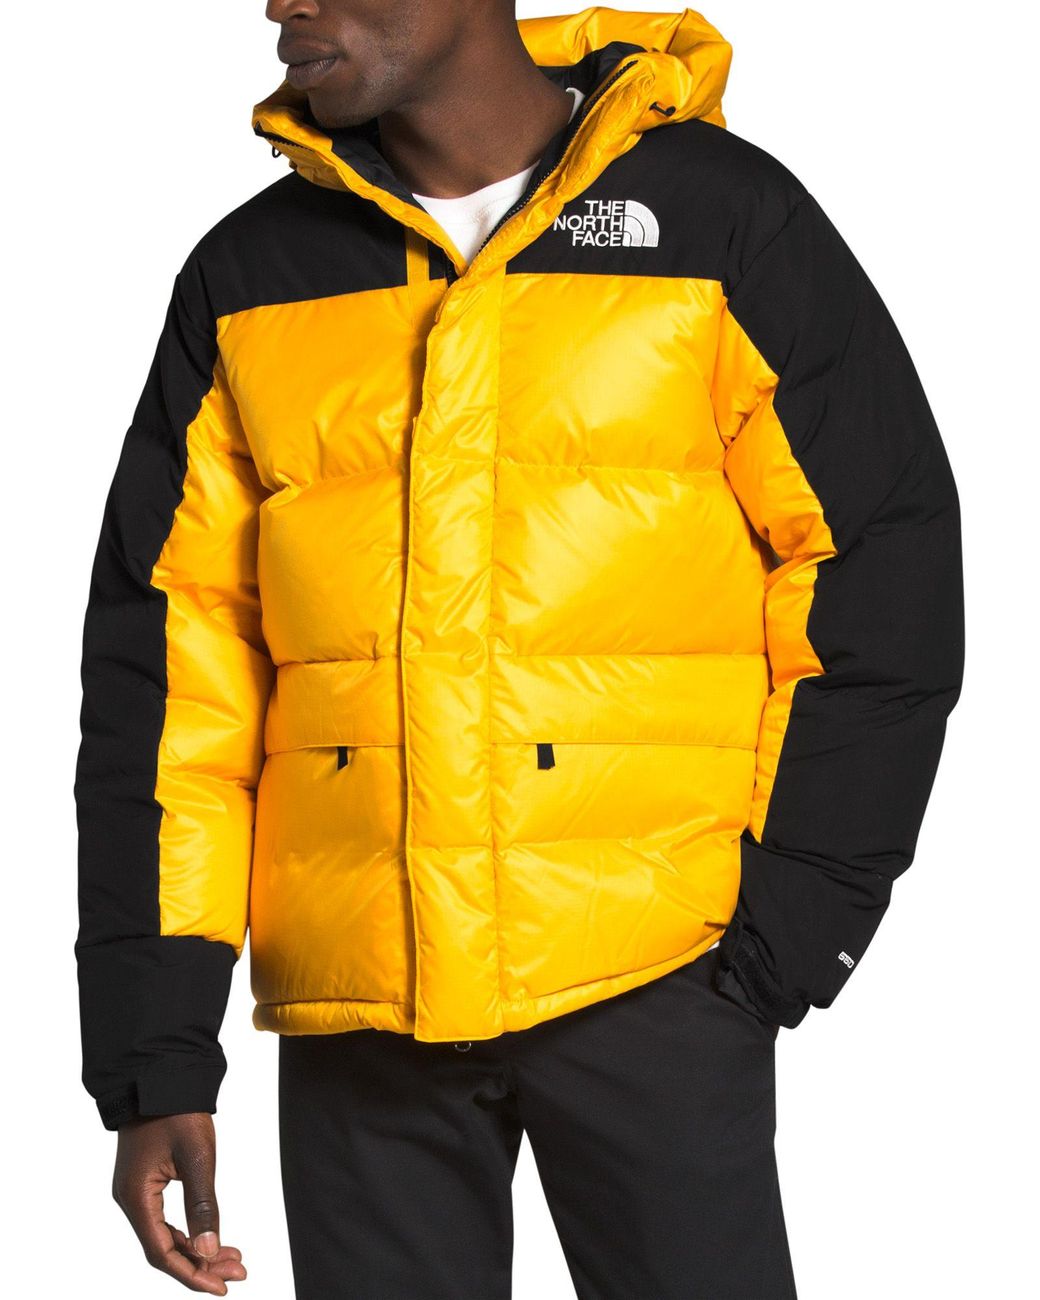 The North Face Synthetic Himalayan Down Parka in Yellow for Men - Lyst